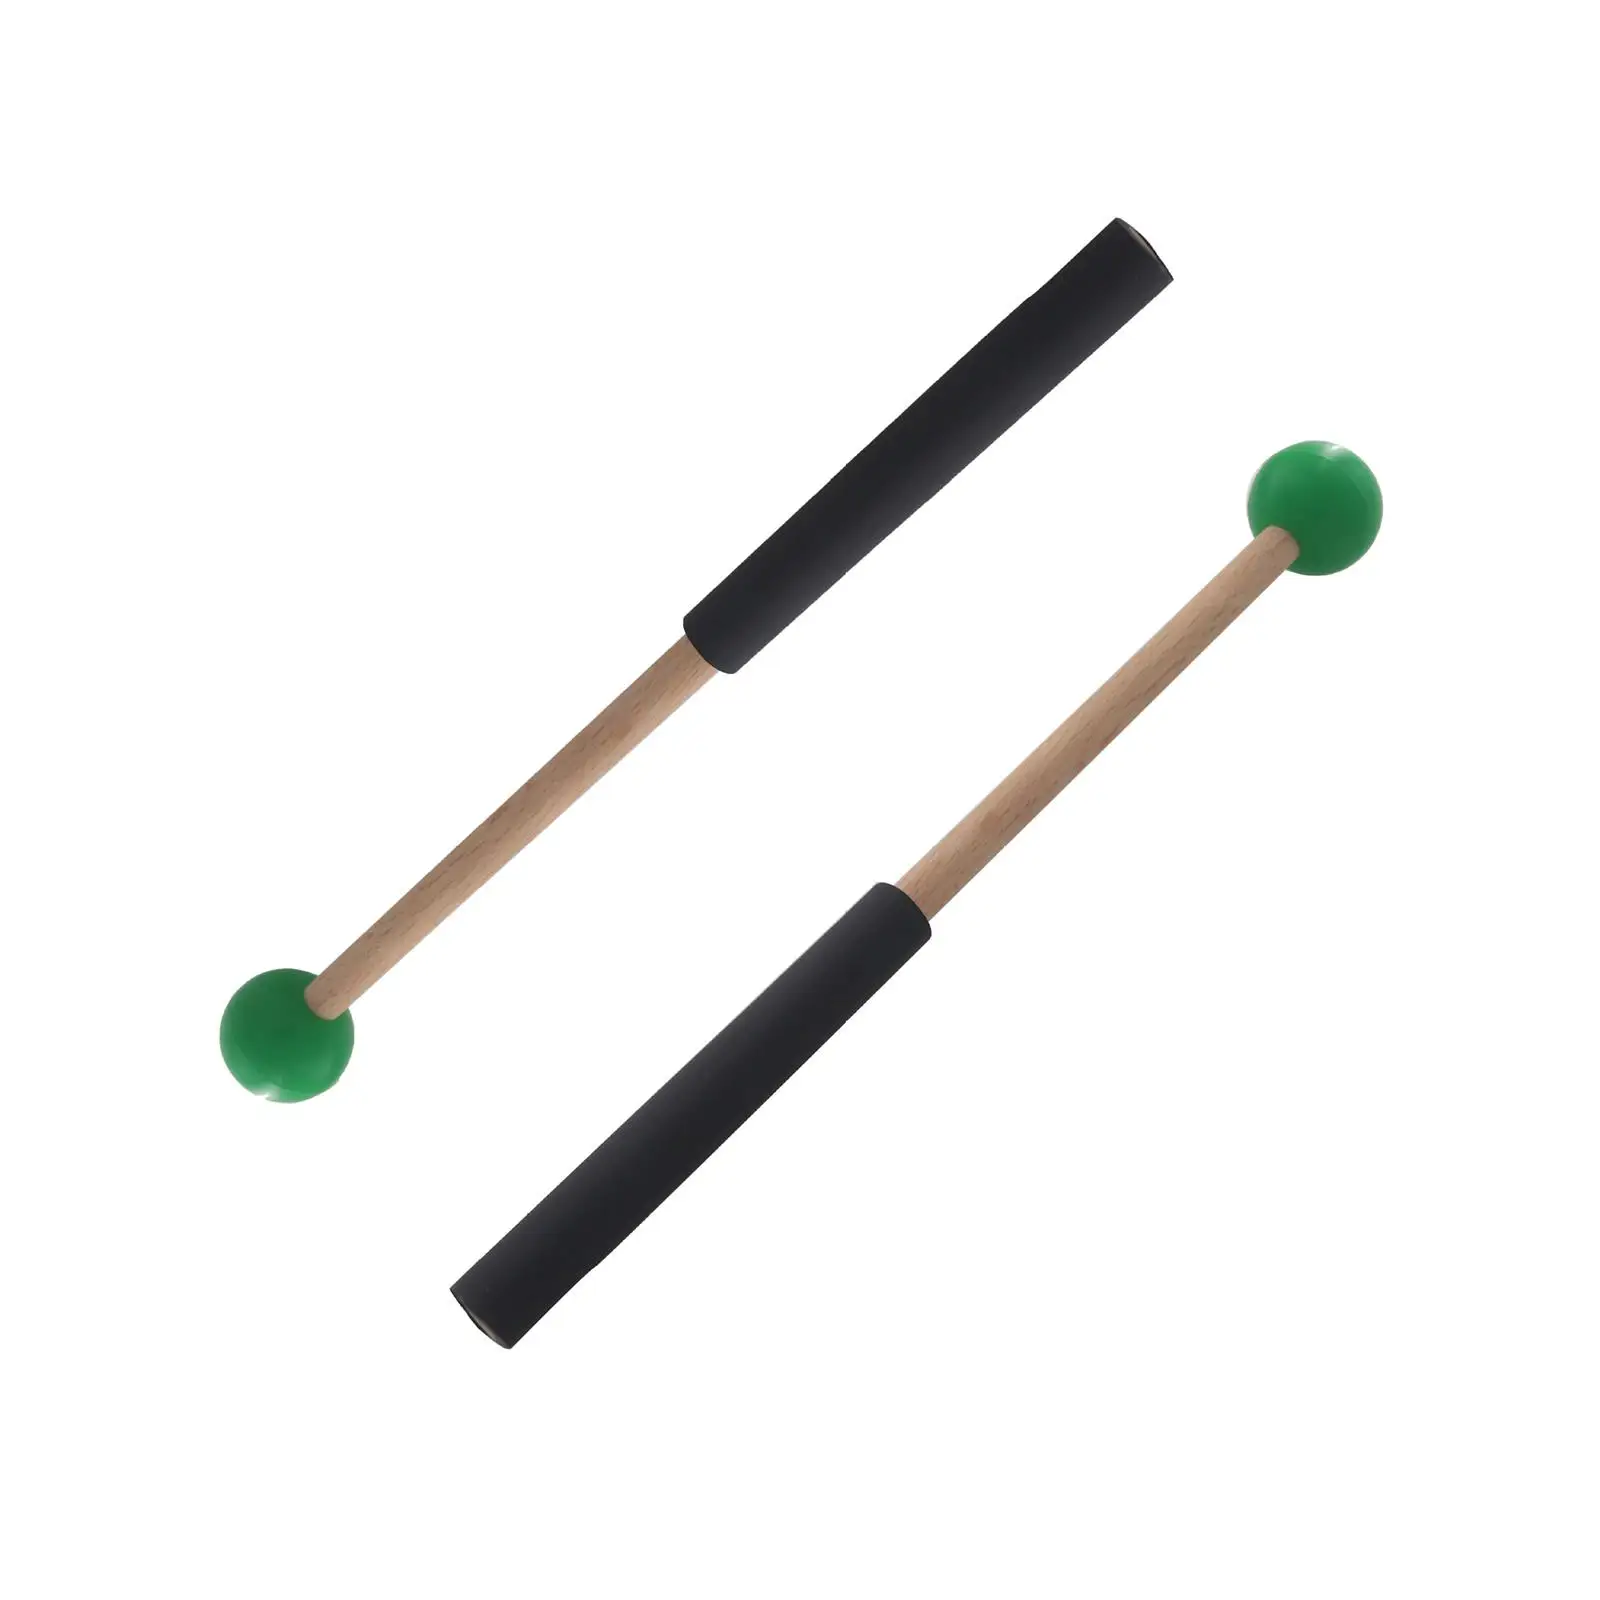 2x Drum Mallet Portable Multifunctional Percussion Drumsticks for Music Education Yoga Exercise